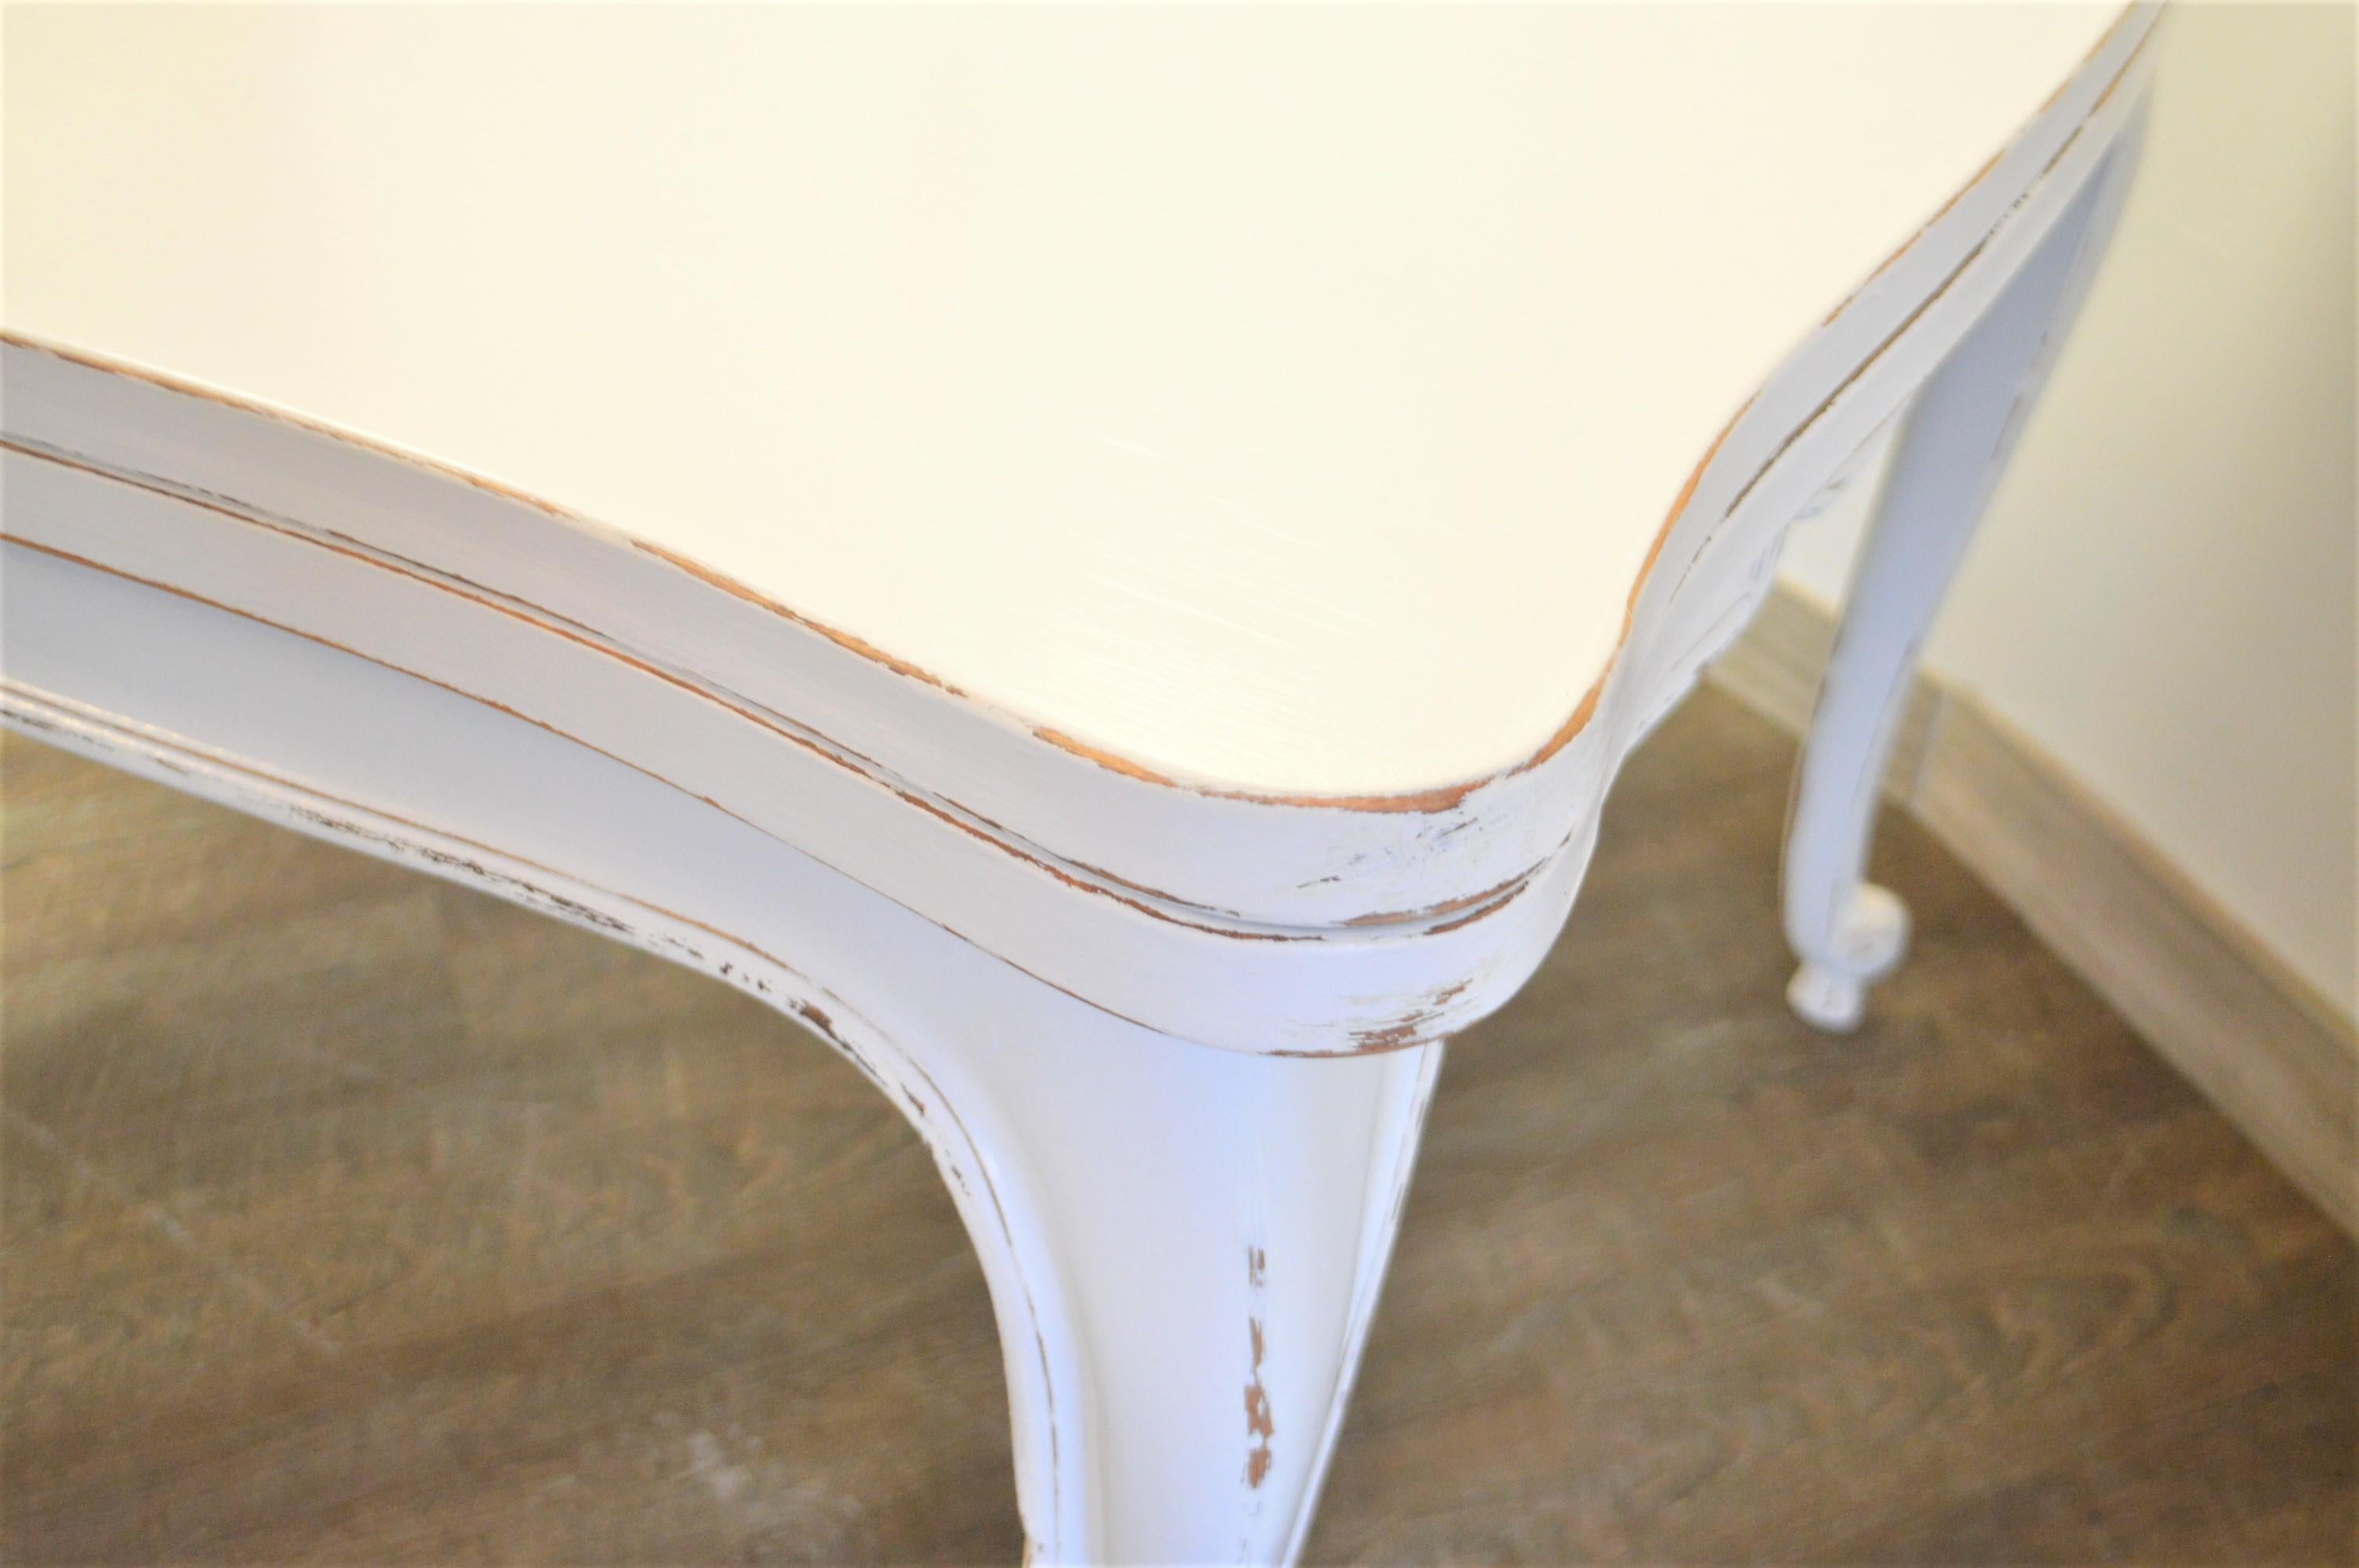 20th Century Provencal Country Dining Table or Desk, Painted Antique White 2 Leaves, France For Sale